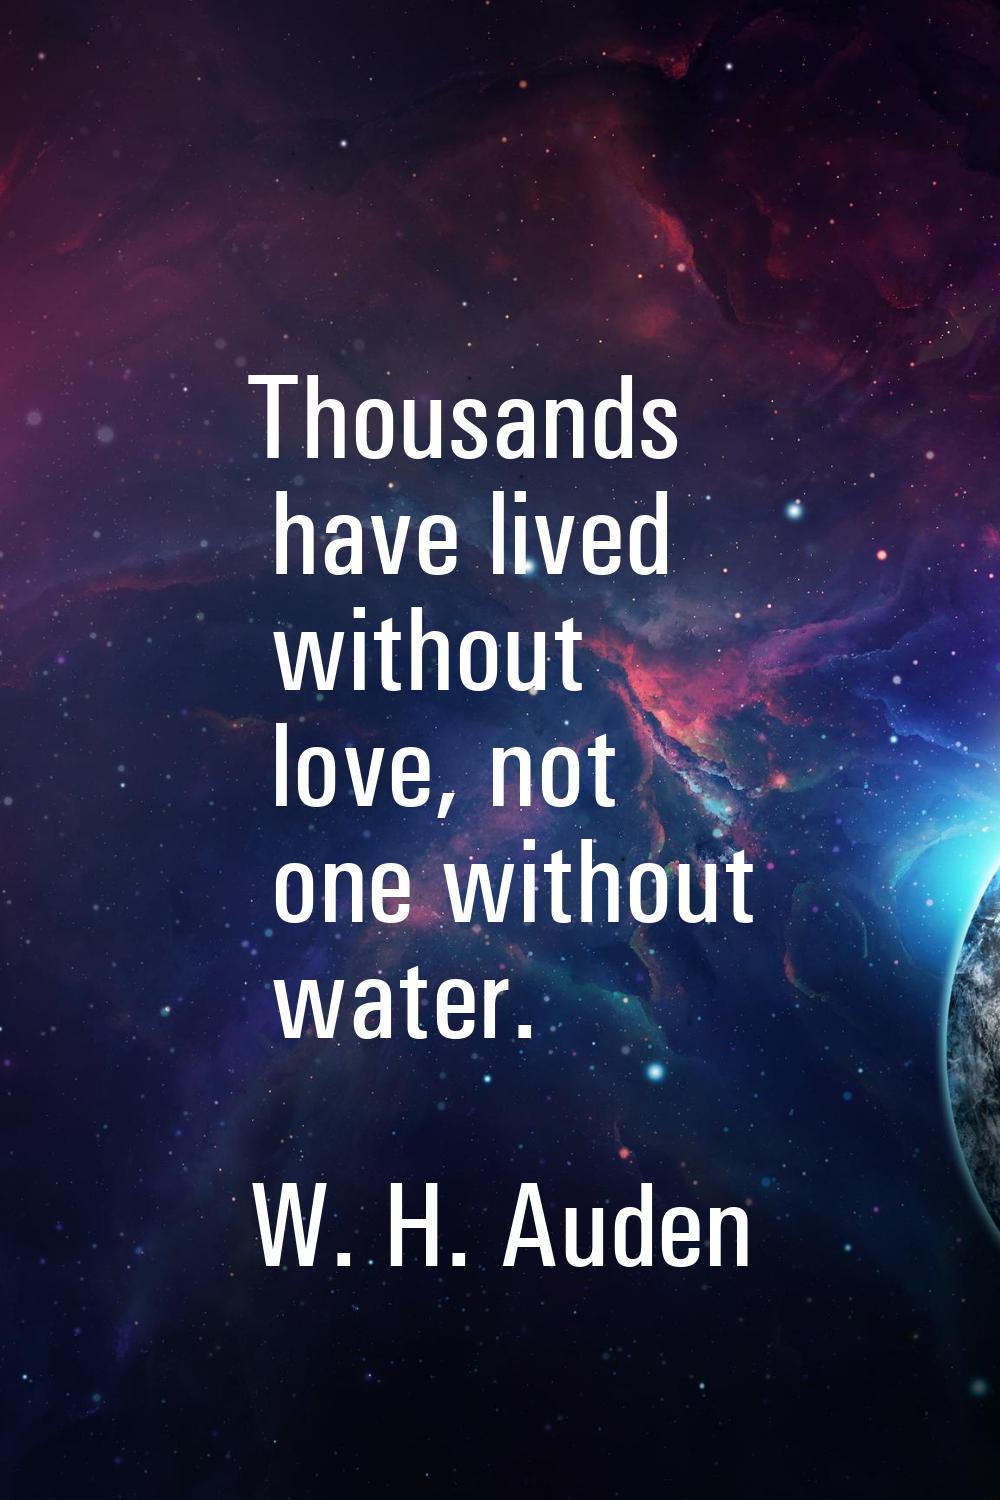 Thousands have lived without love, not one without water.